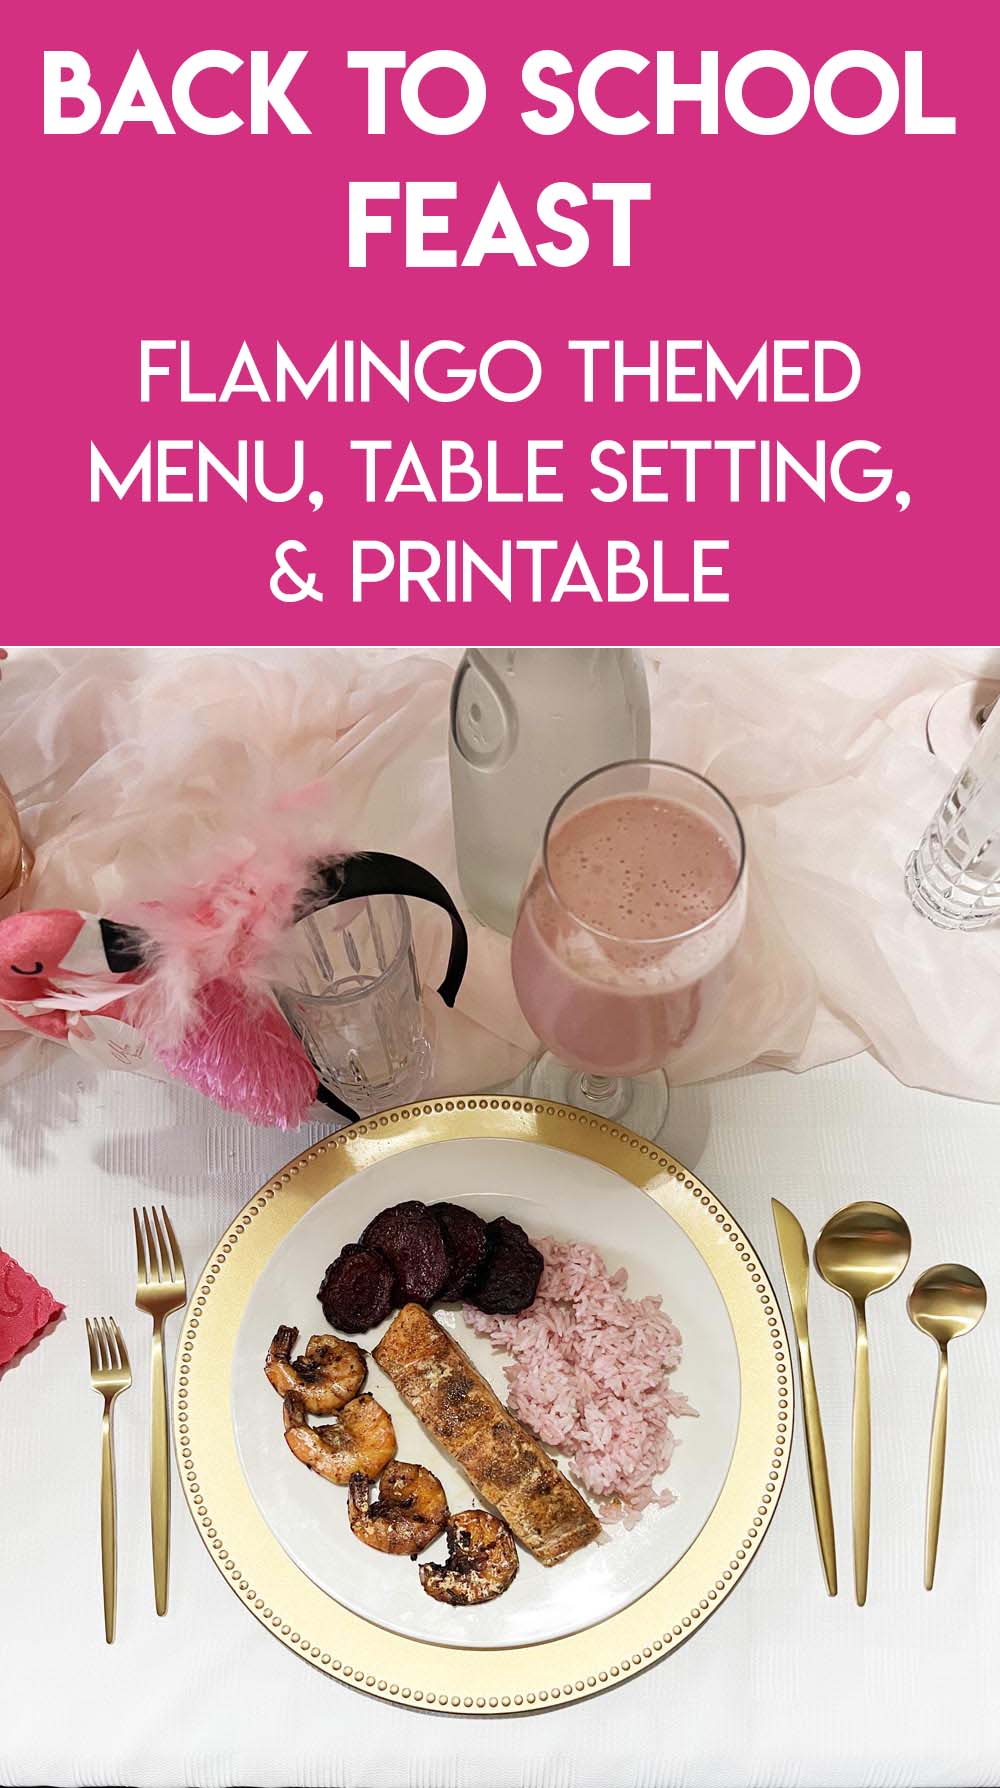 A back to school feast and family theme is a beloved tradition where we introduce a new theme for our family to focus on during the school year. This year's feast and theme are flamingo themed. Find menu ideas, table setting ideas, and a printable "be like a flamingo" theme here. Flamazing! via @lara_neves